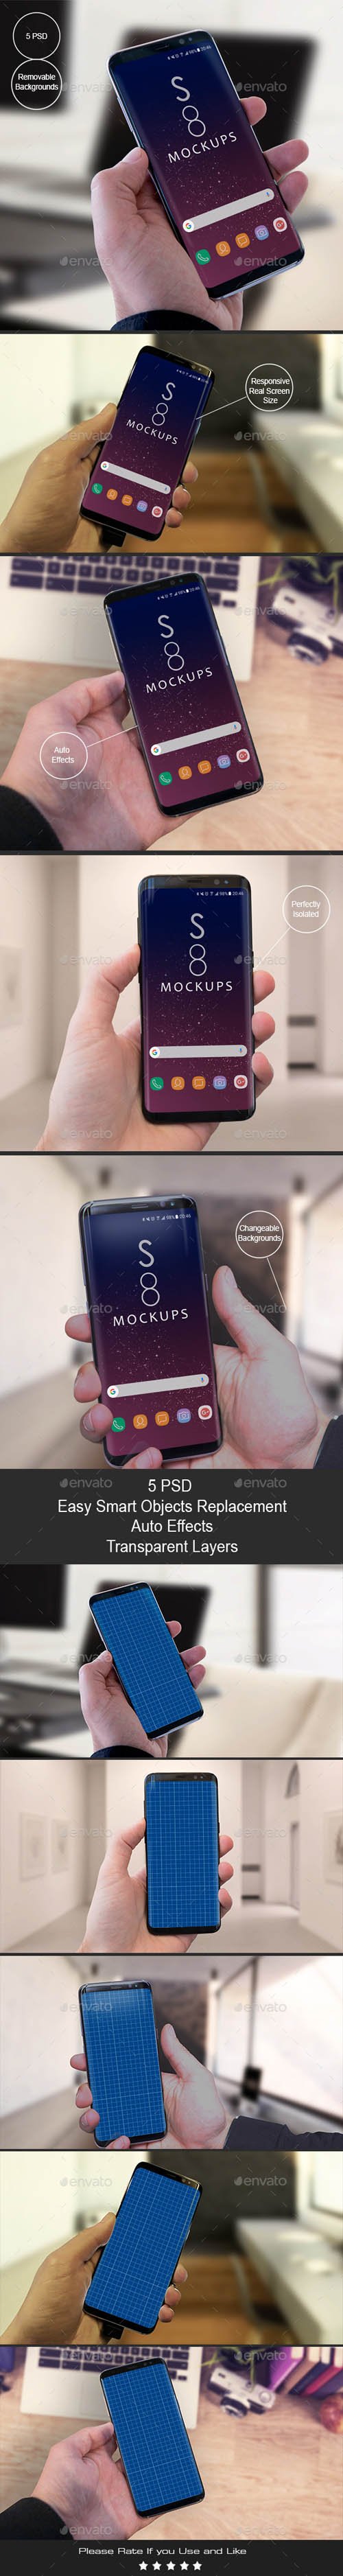 S8 Galaxy Modern Android Mockups-Apps Ui Showcase 19727219